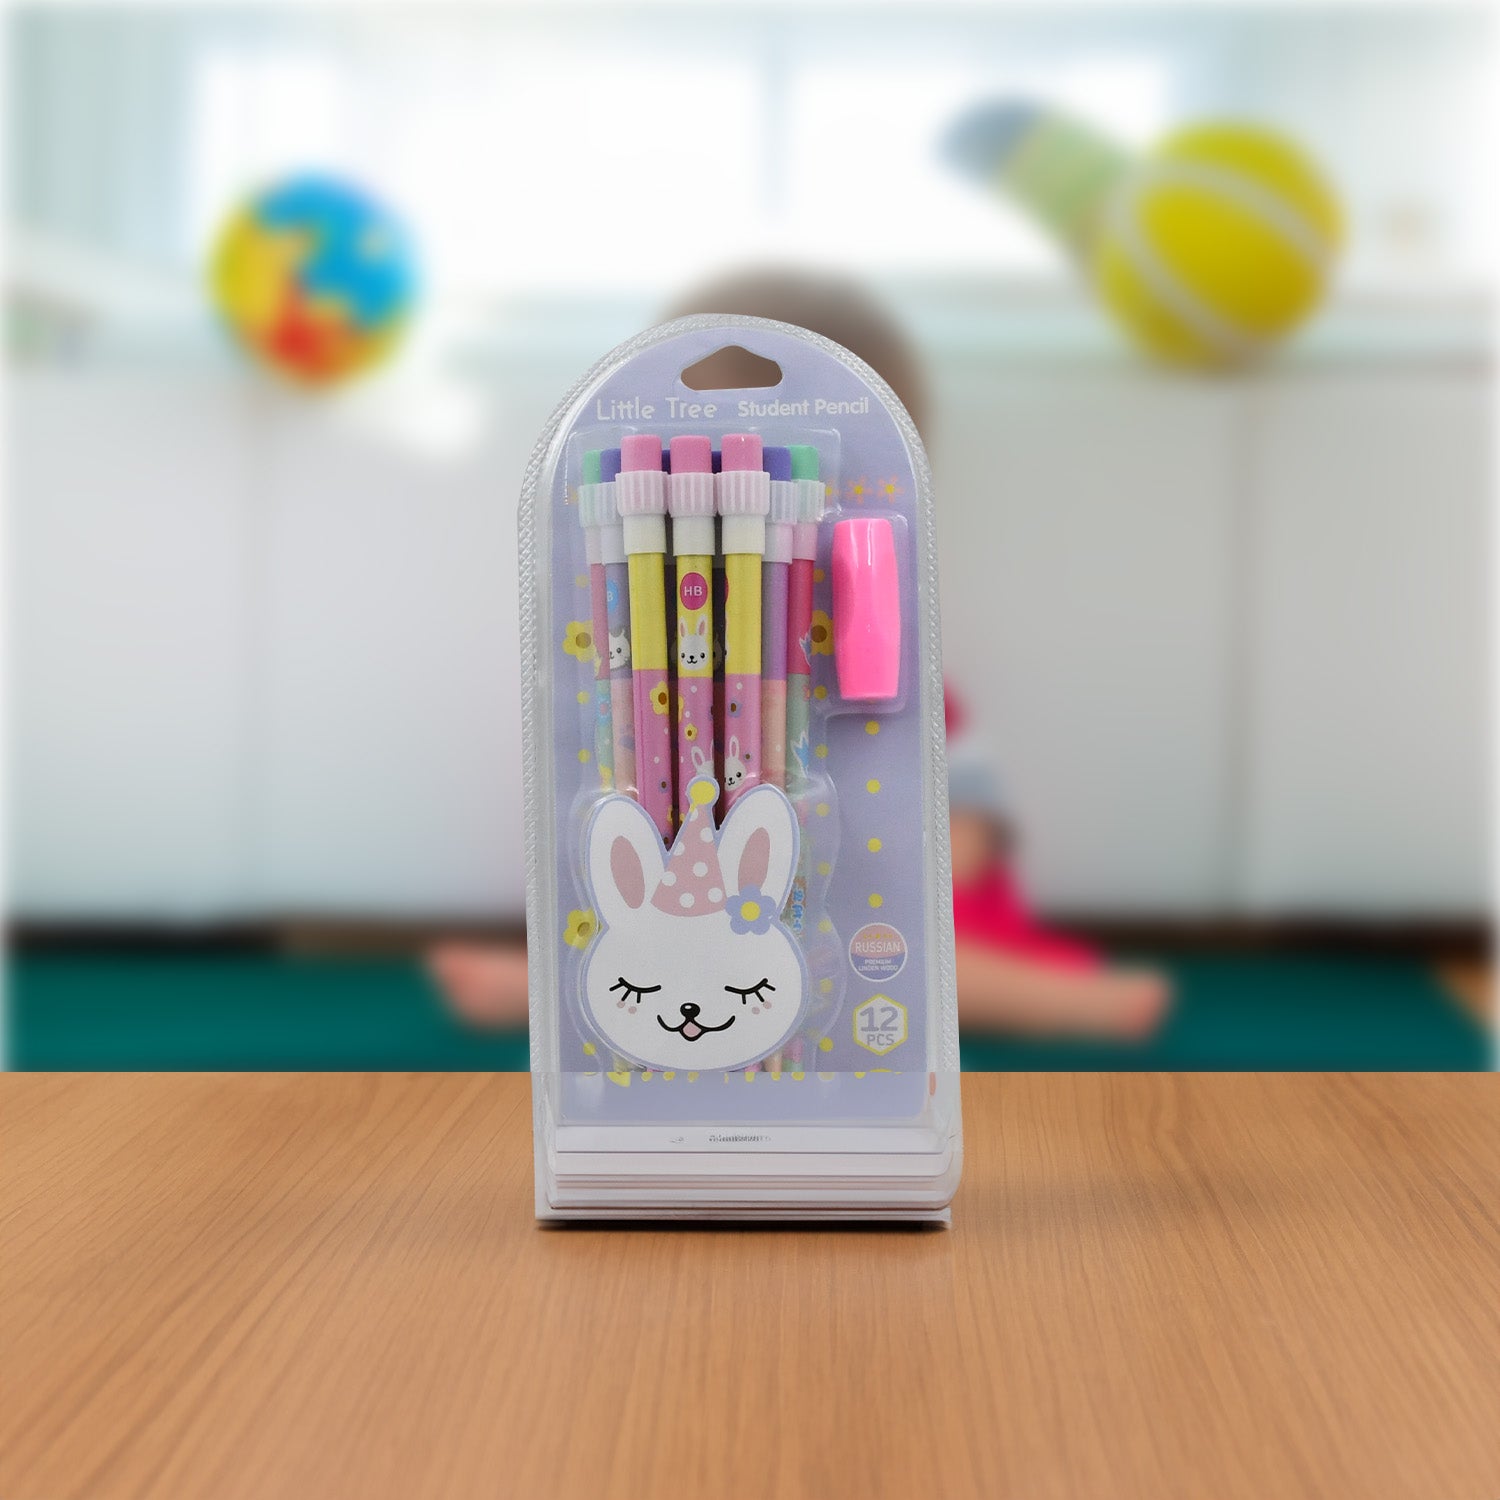 4396 Cute Rabbit Bear Drawing Graphite Writing Pencil Set with Pencil Sharpener & Eraser, Pencil and Eraser Set with Eraser for Kids, for Girls, Fancy School Stationary, Birthday Party Return Gift (14 Pc Set)